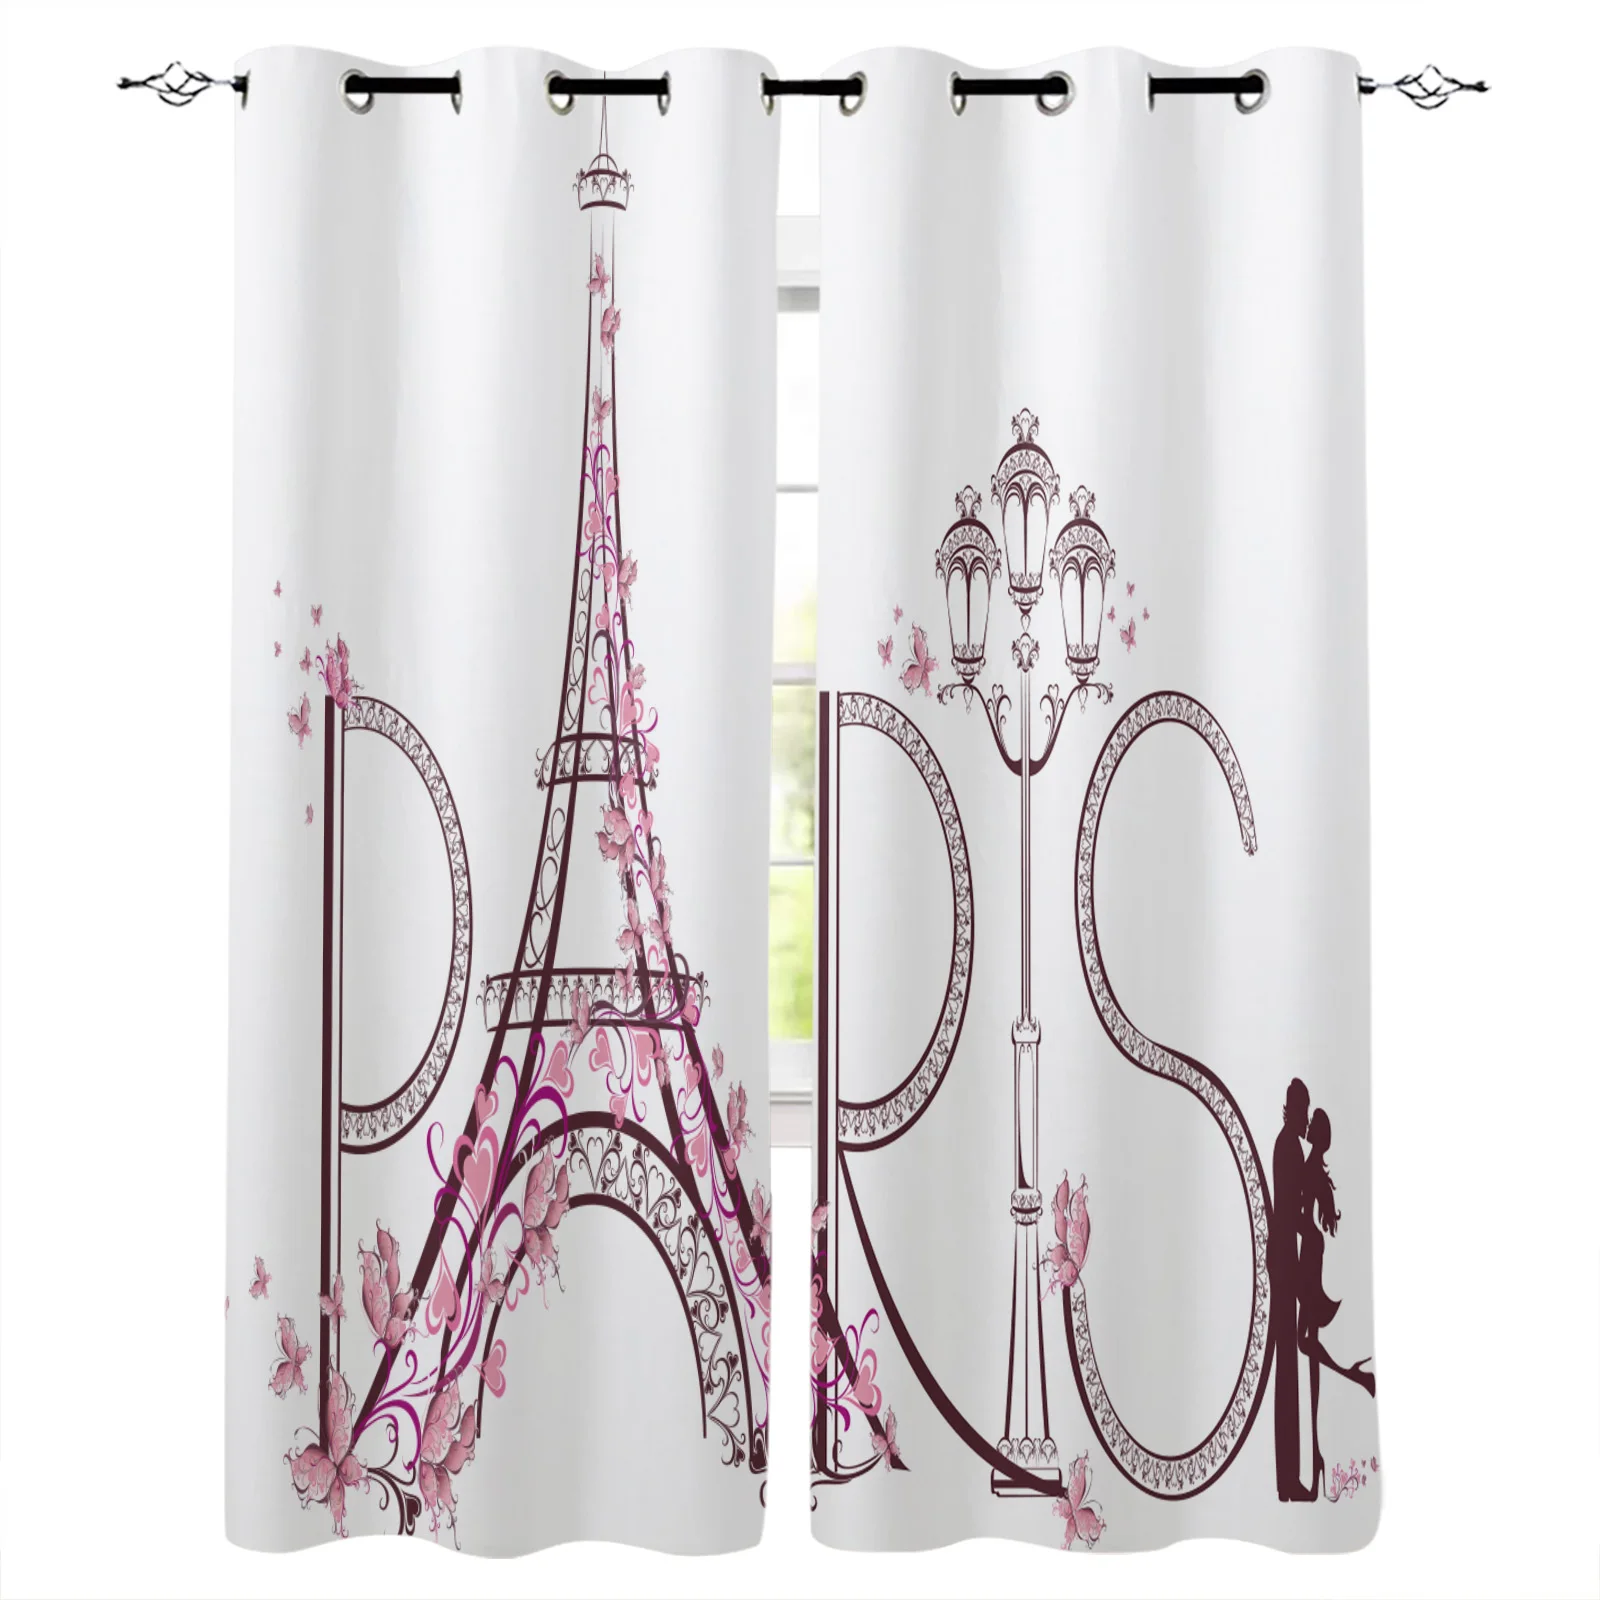 

France Paris Eiffel Tower Blackout Curtain Living Room Window Curtain Children's Blackout Curtains for The Bedroom